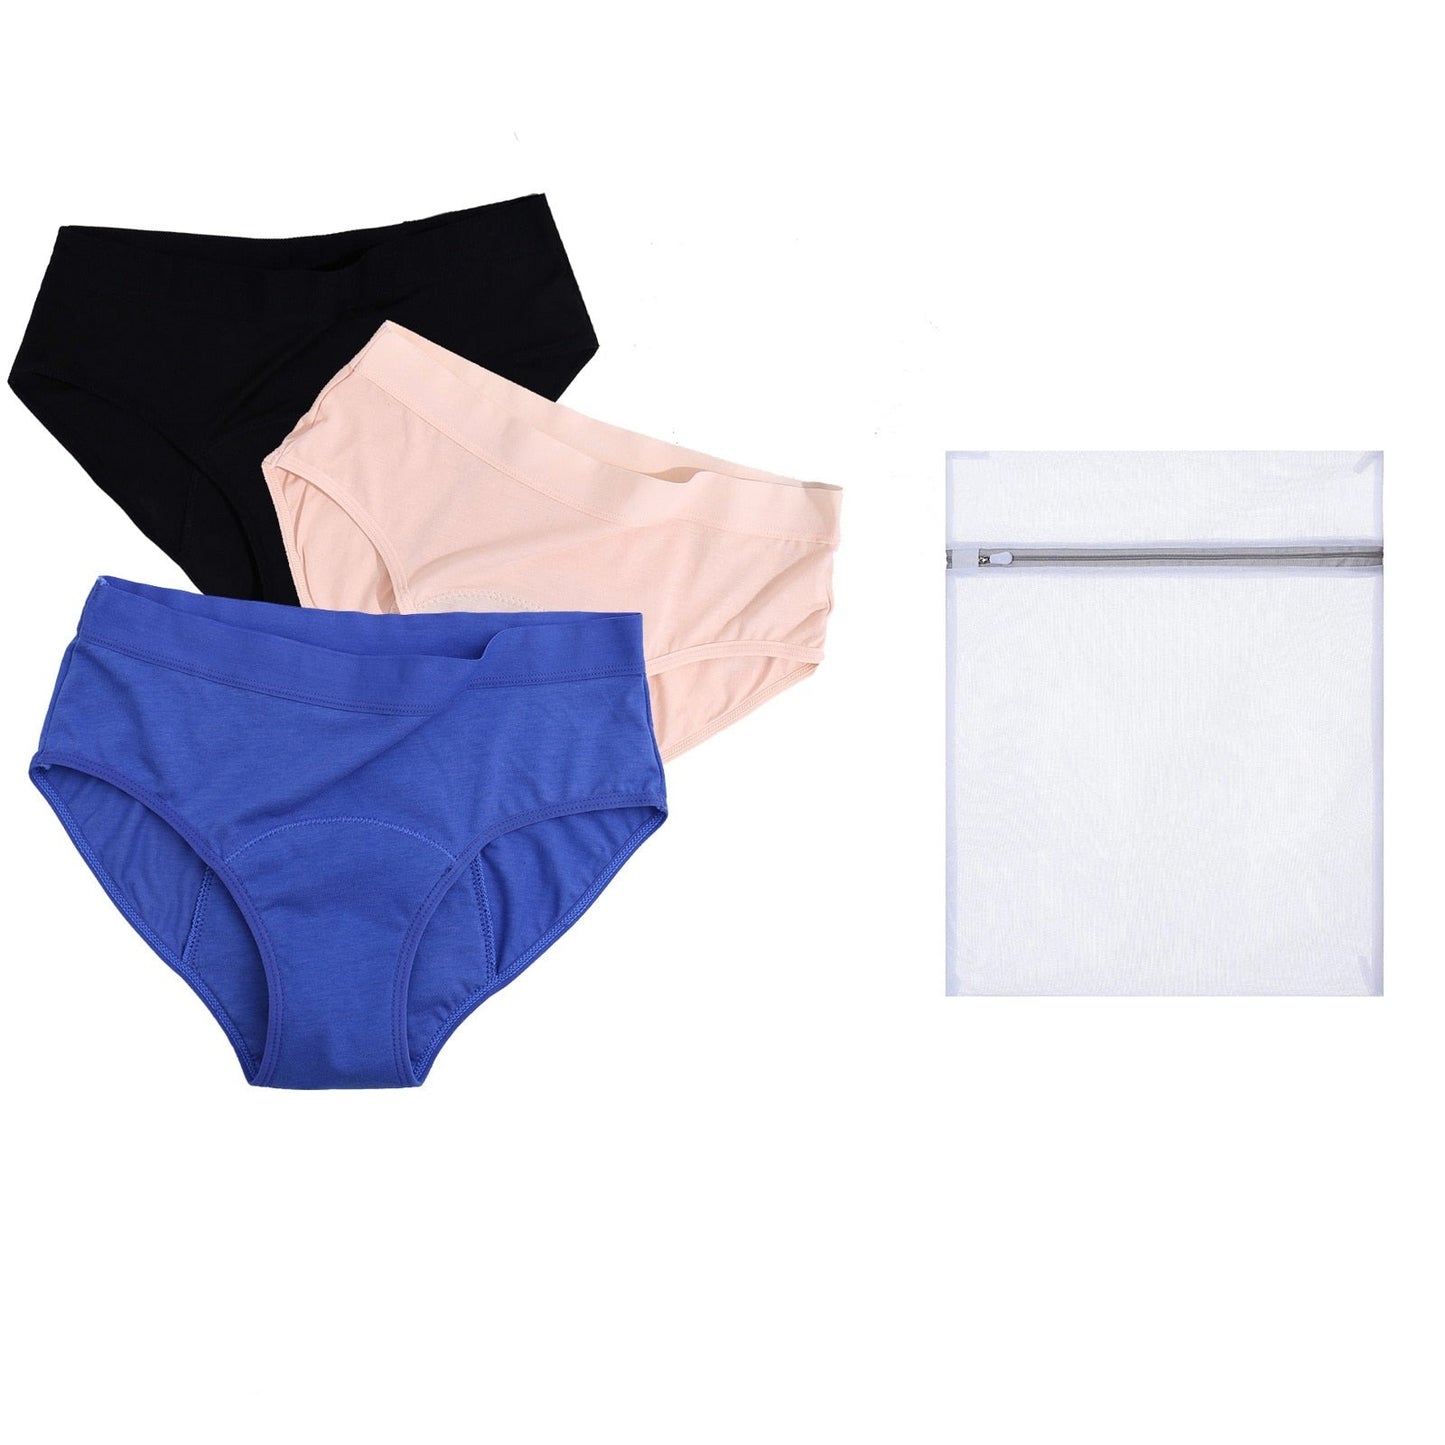 2/3 Piece Set Period Pants with Laundry Bag